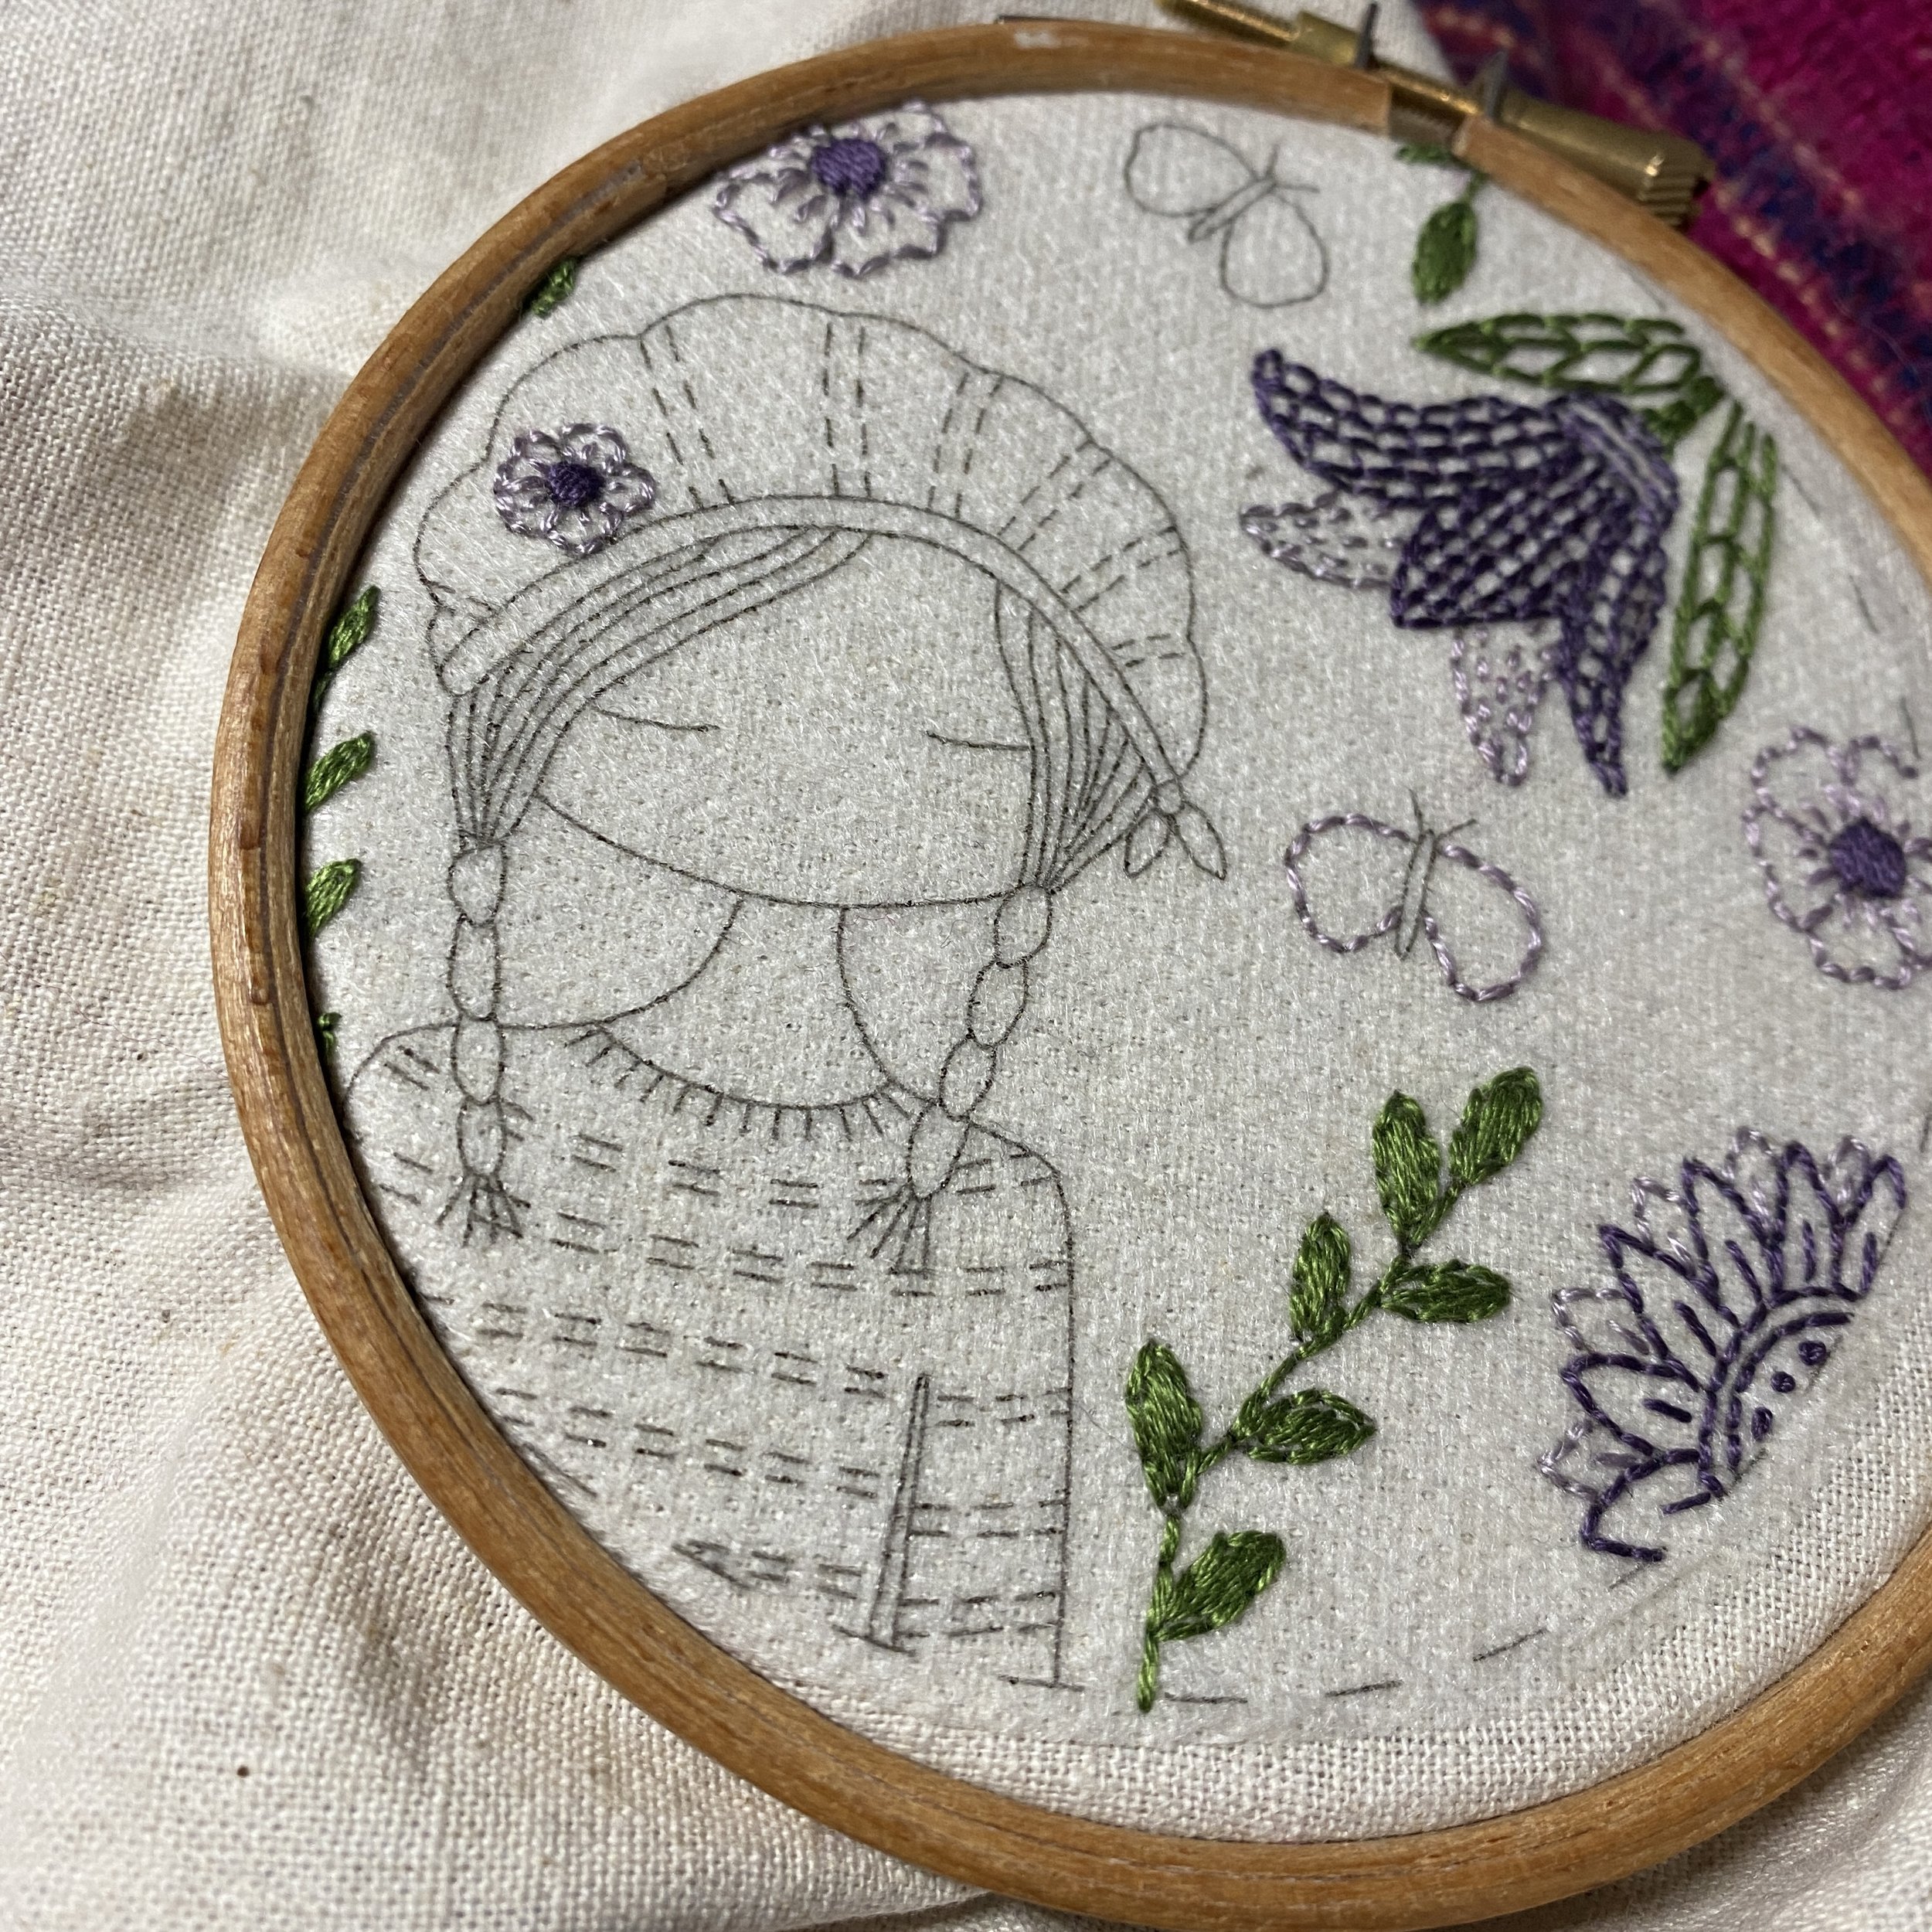 Learn how to load fabric in your hoop I beginner embroidery techniques 